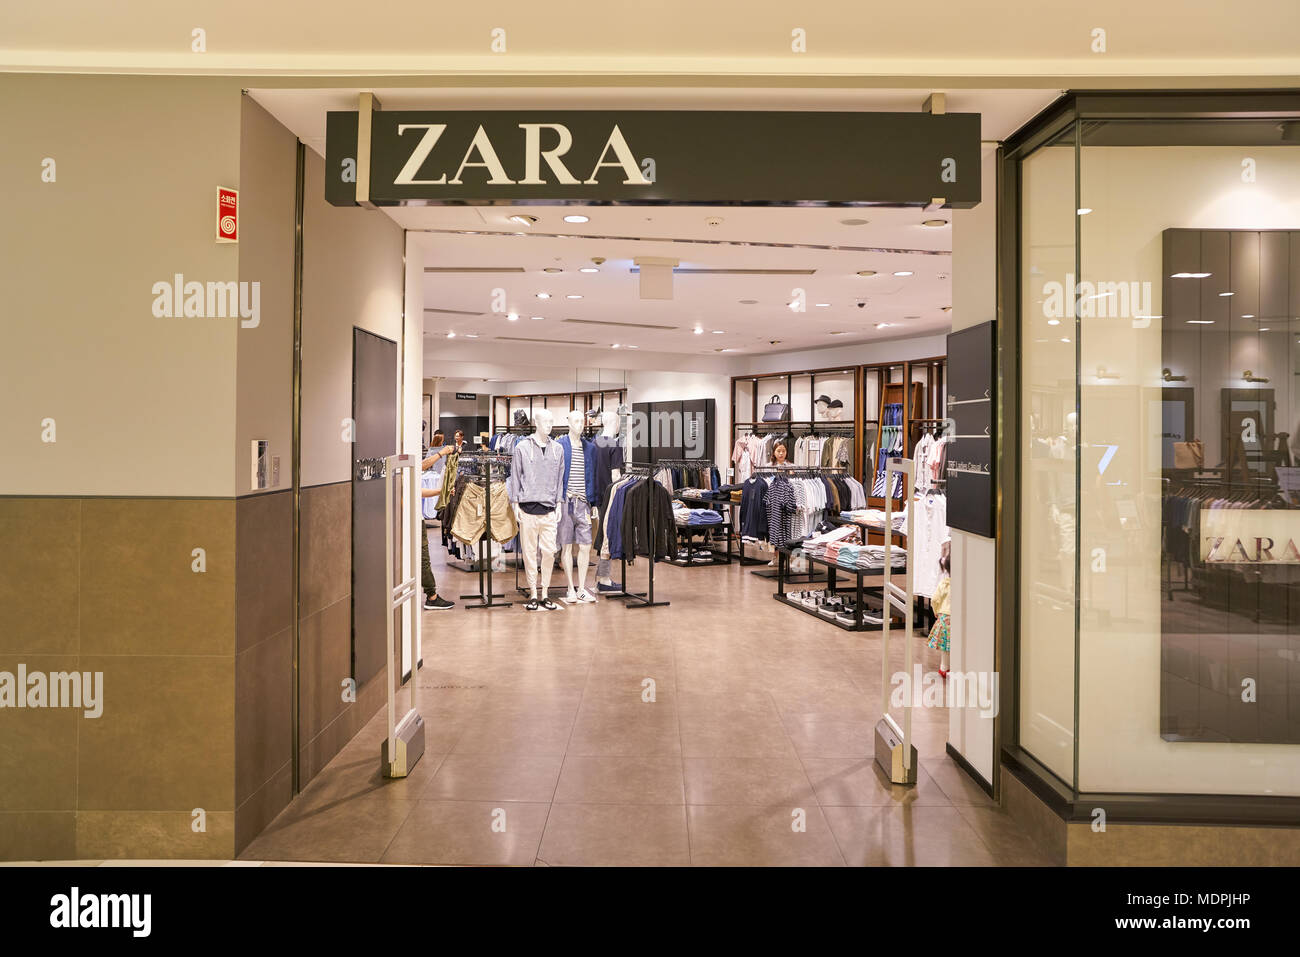 Zara store at Lotte Department Store 